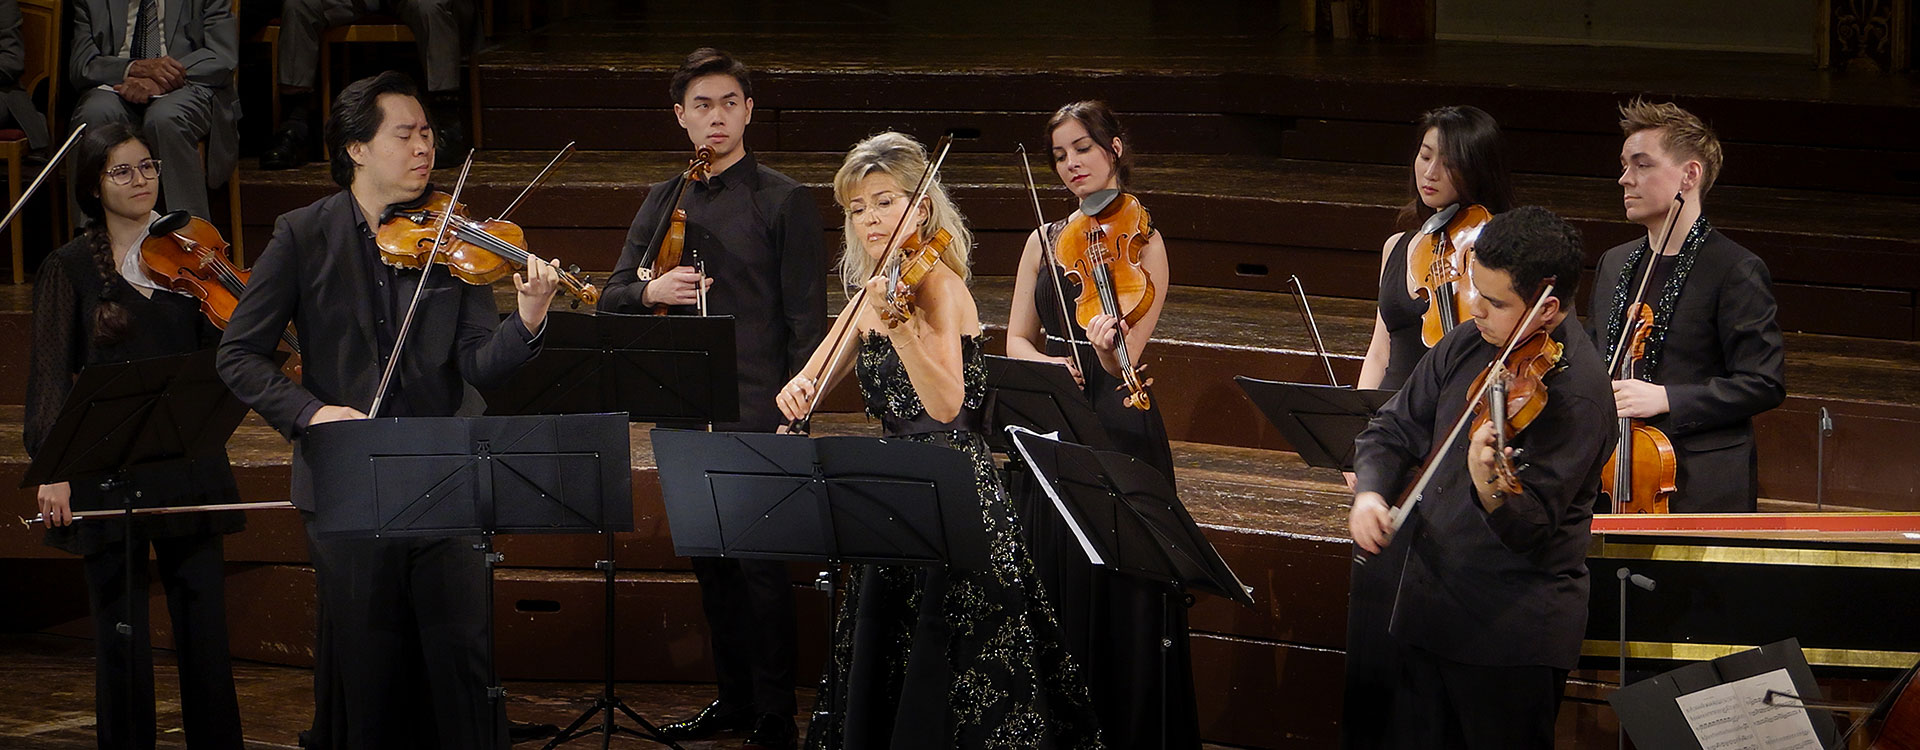 Anne-Sophie Mutter & Mutter’s Virtuosi - 60 Years of Passion for the Violin from the Wiener Musikverein